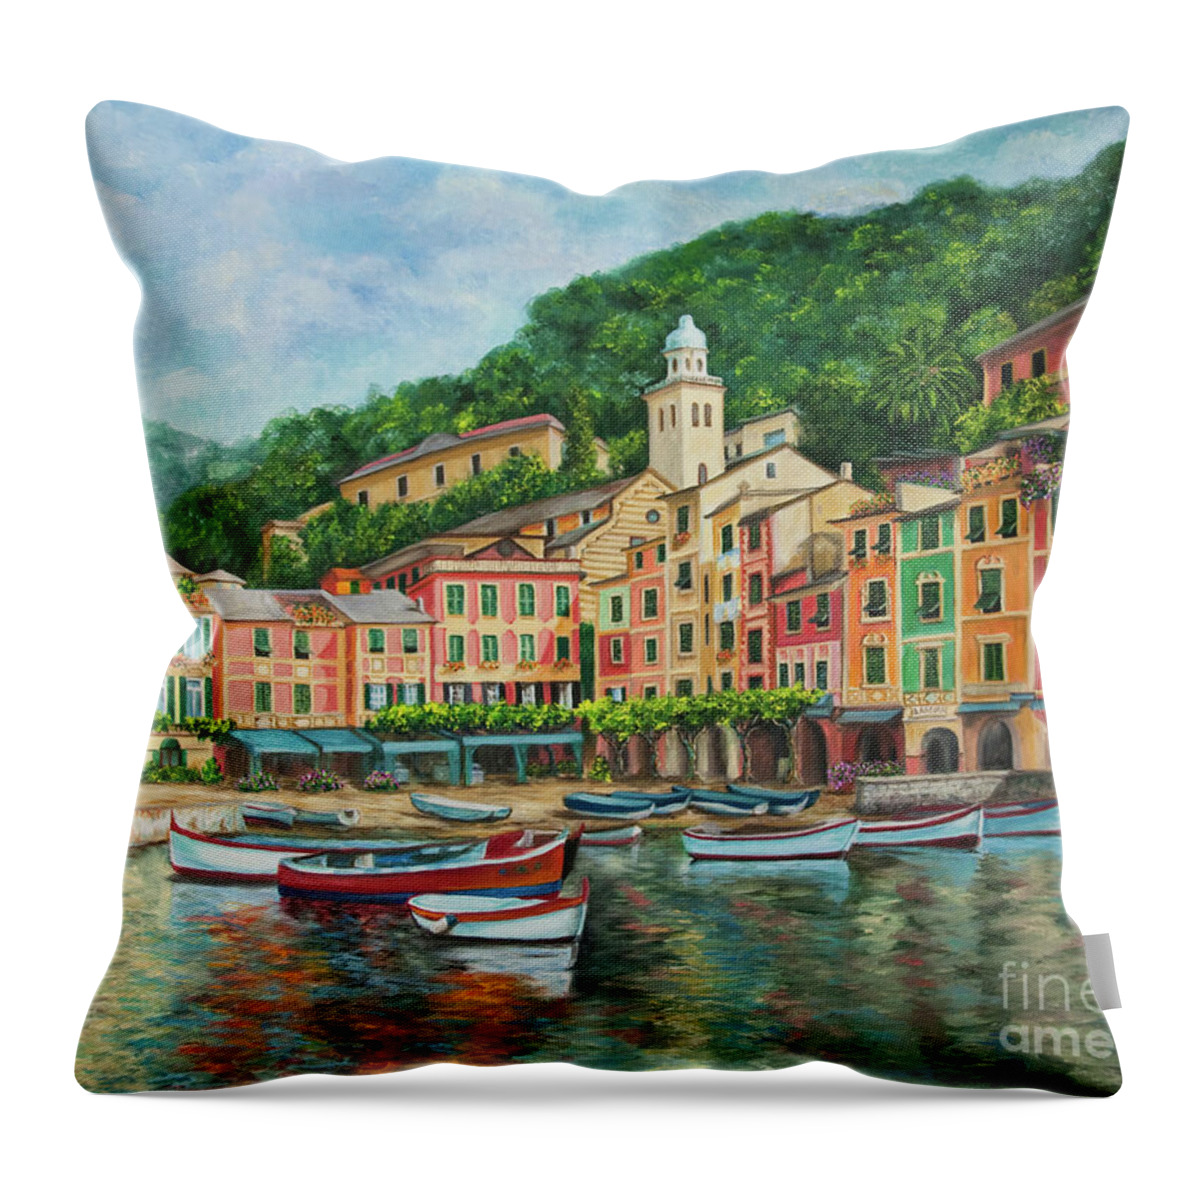 Portofino Italy Art Throw Pillow featuring the painting Reflections Of Portofino by Charlotte Blanchard